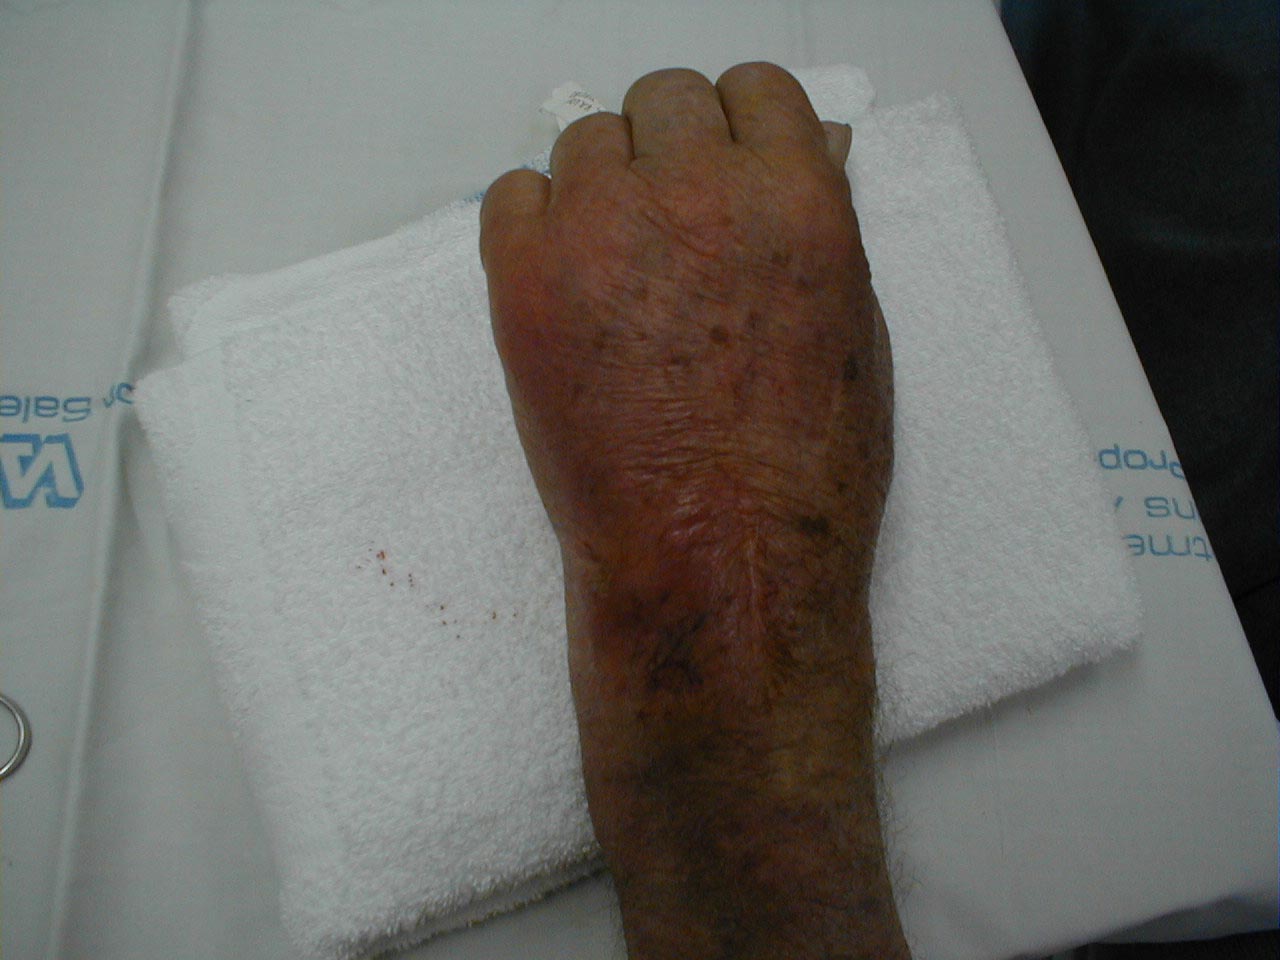 Gout of the Left Wrist: Note swelling and redness over left wrist area.